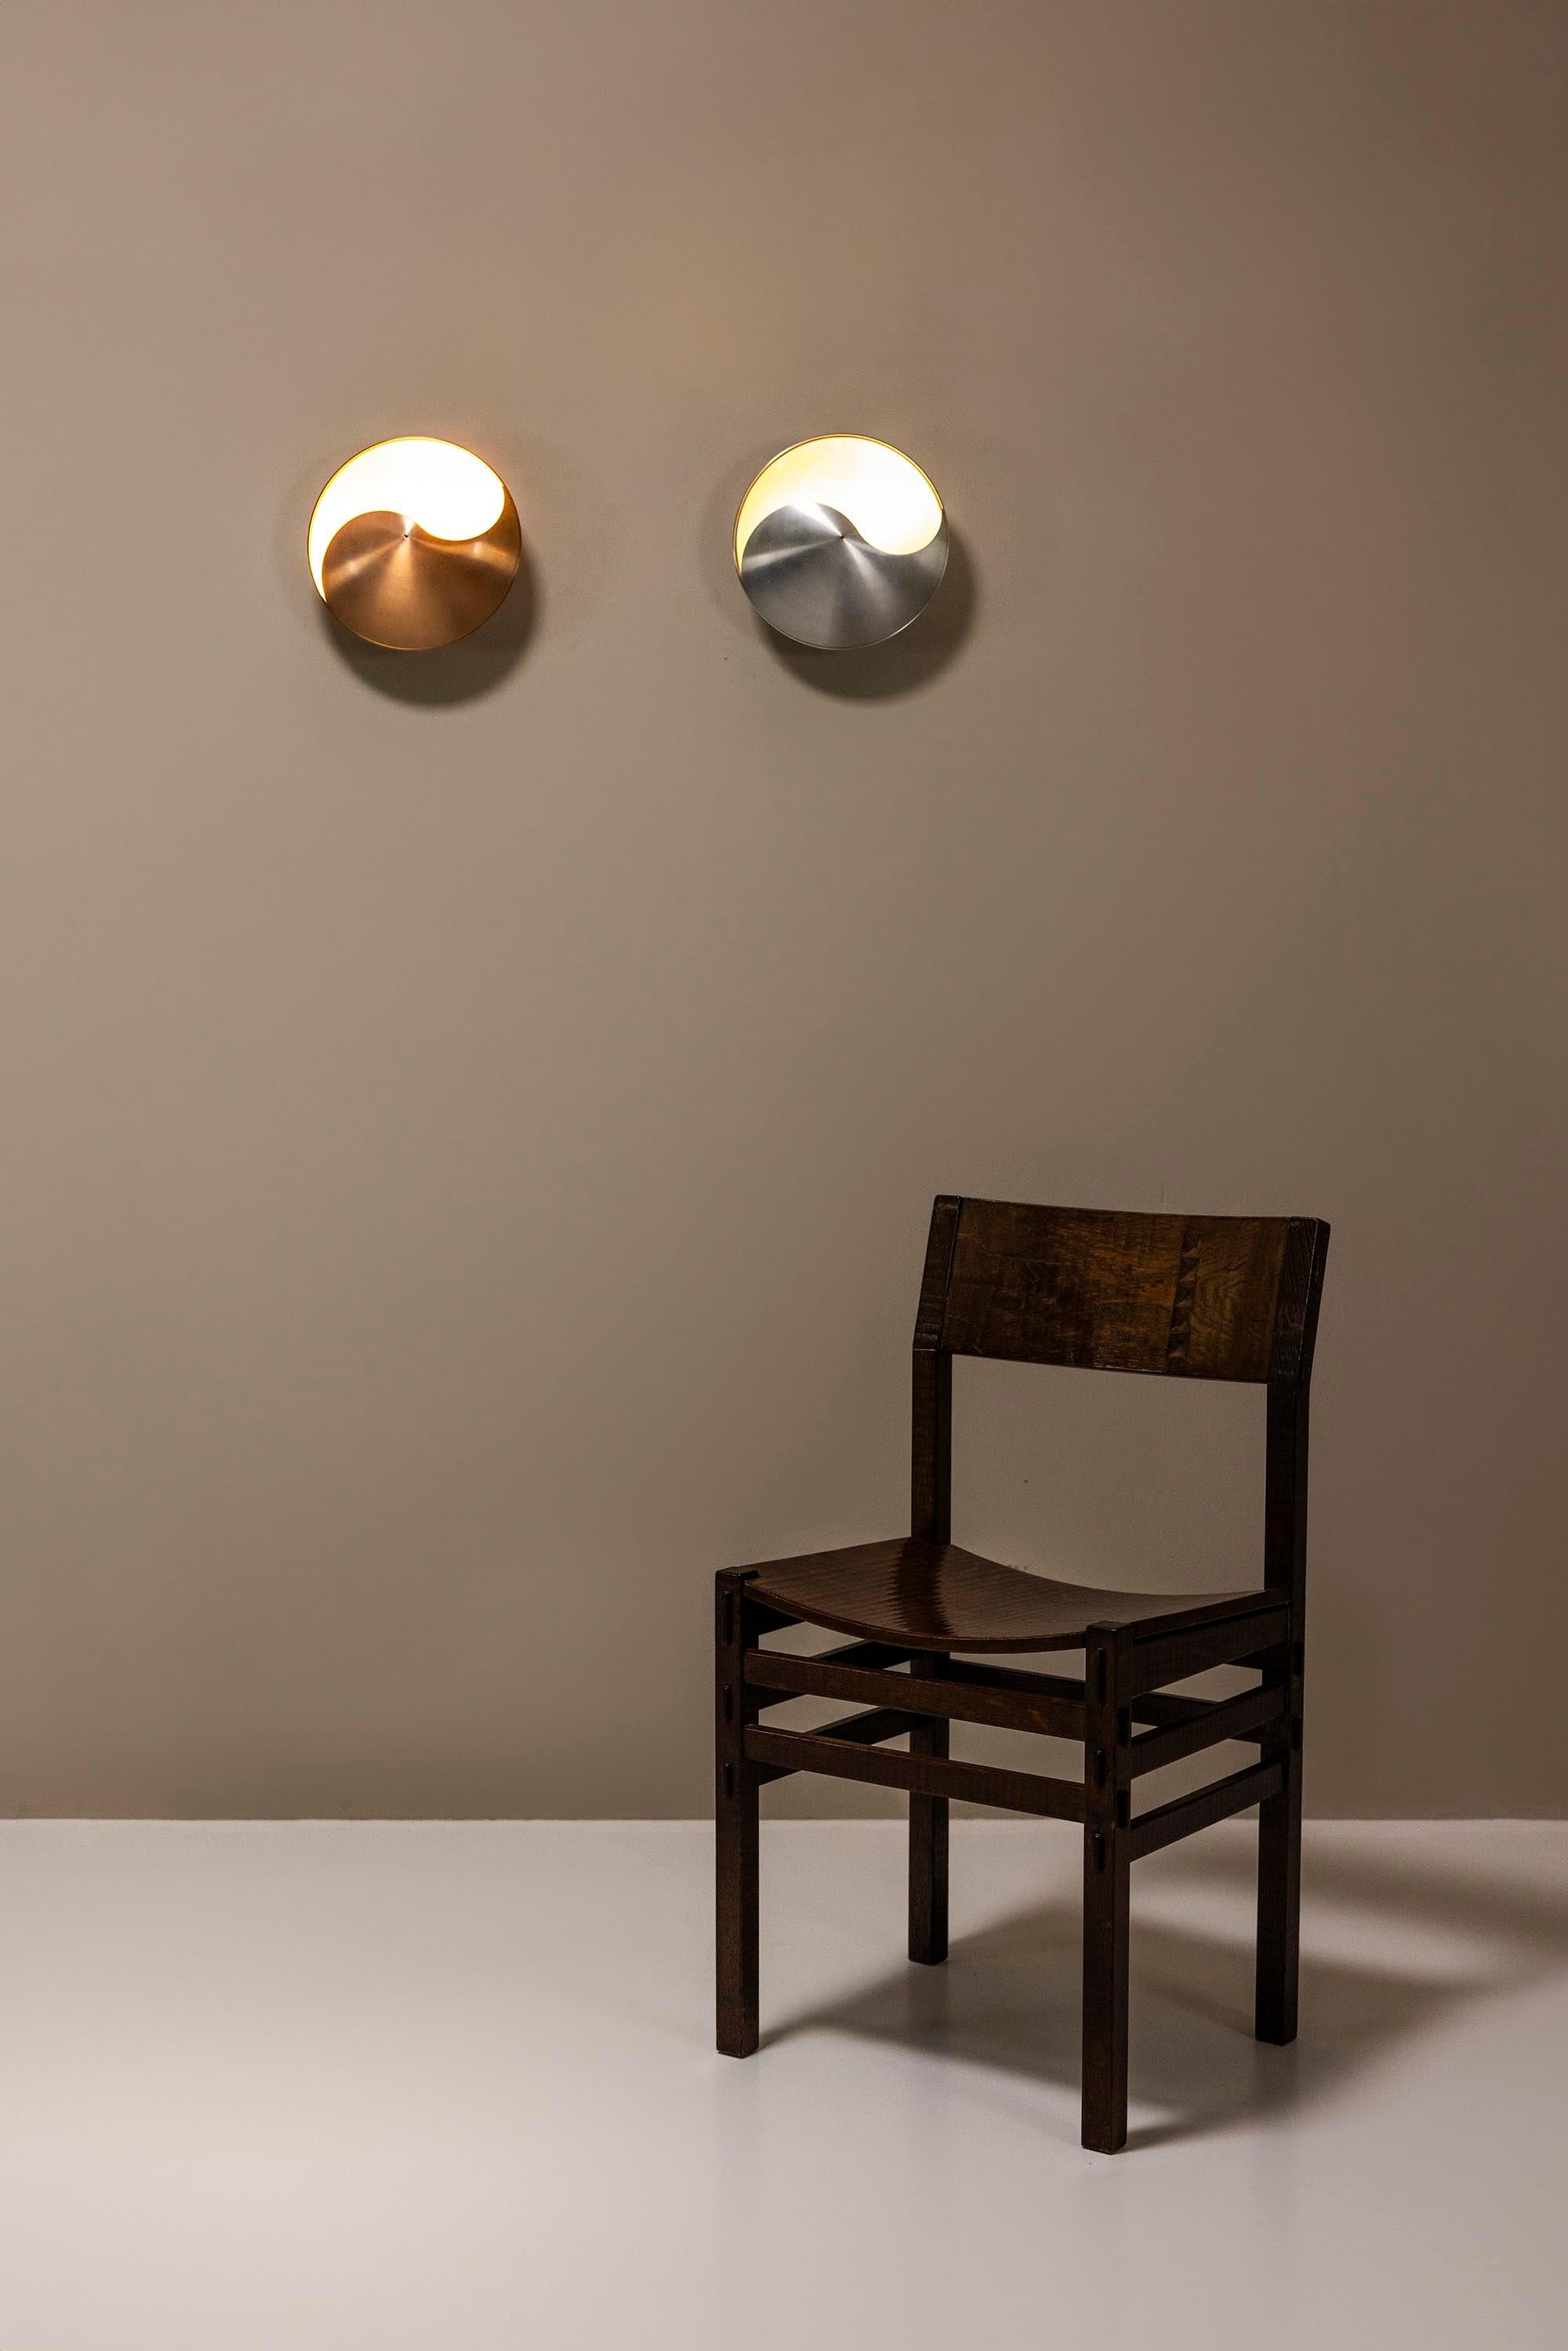 Five “YinYang” Wall Lamps by H. Sneyders de Vogel for Raak, The Netherlands For Sale 3